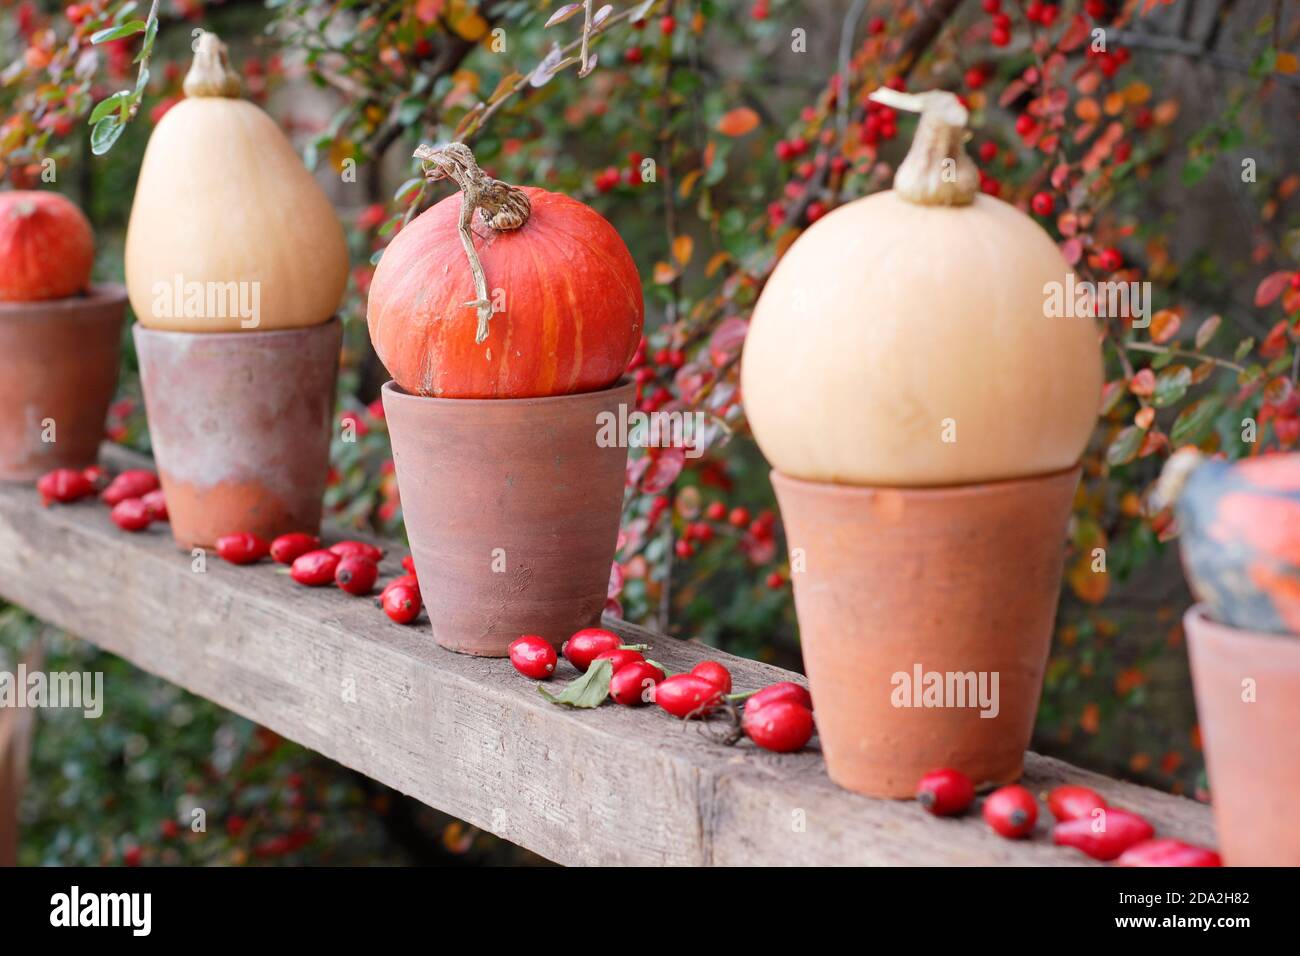 Autumn garden display of pumpkins in pots in a row on a wooden shelf. UK Stock Photo